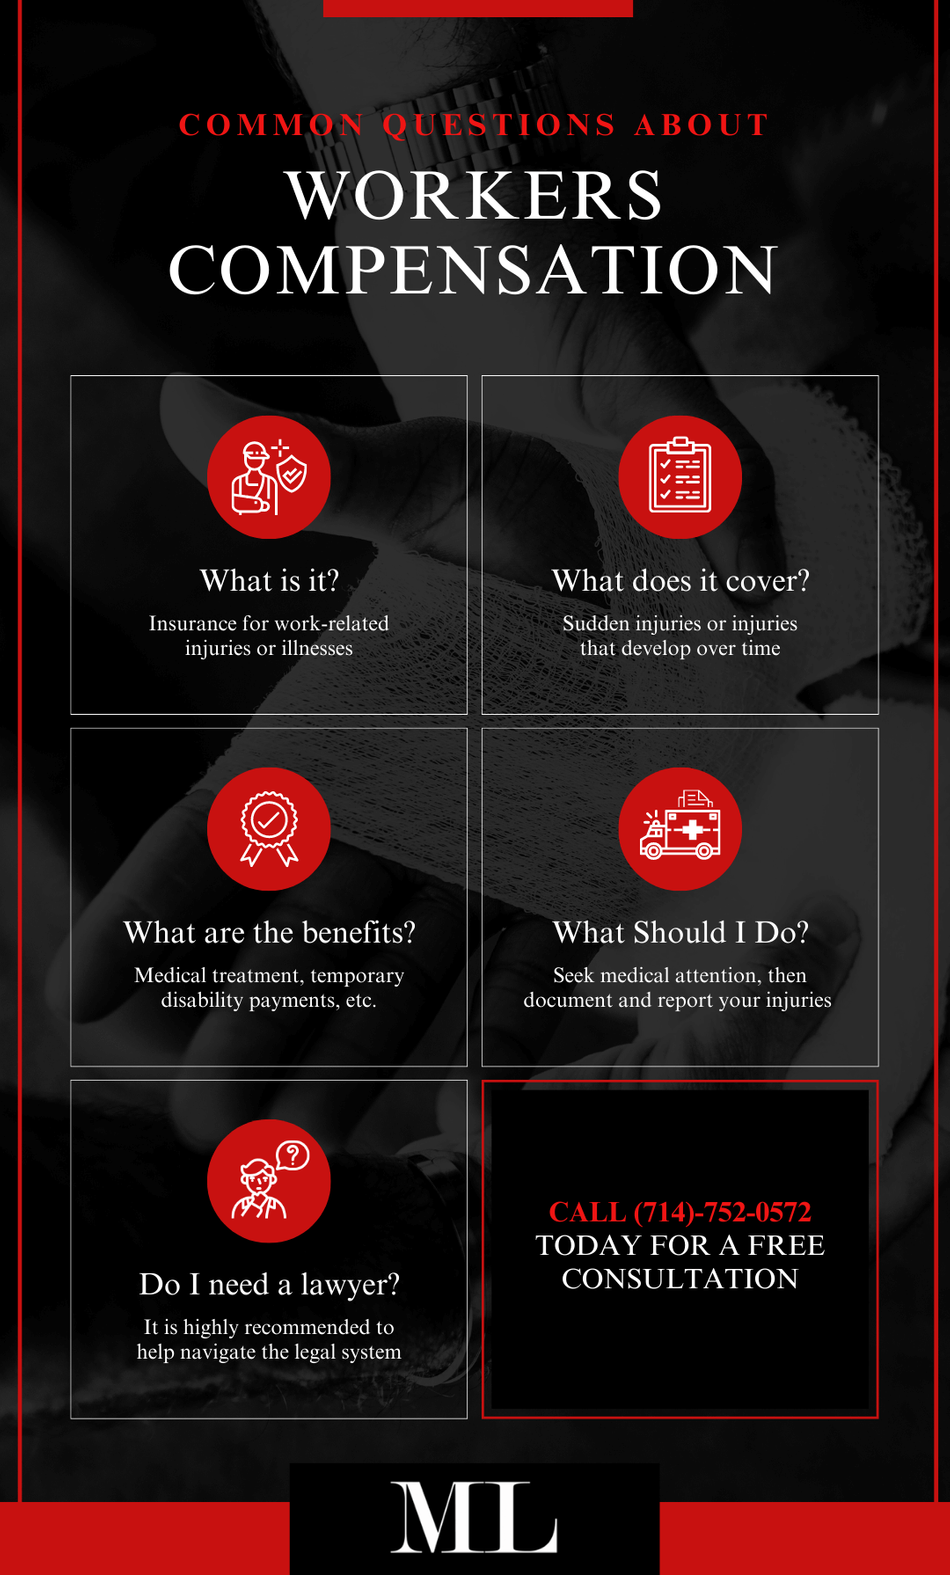 M37918 - Montoya Law_Infographic - Common Questions About Workers Compensation (2) (1).png